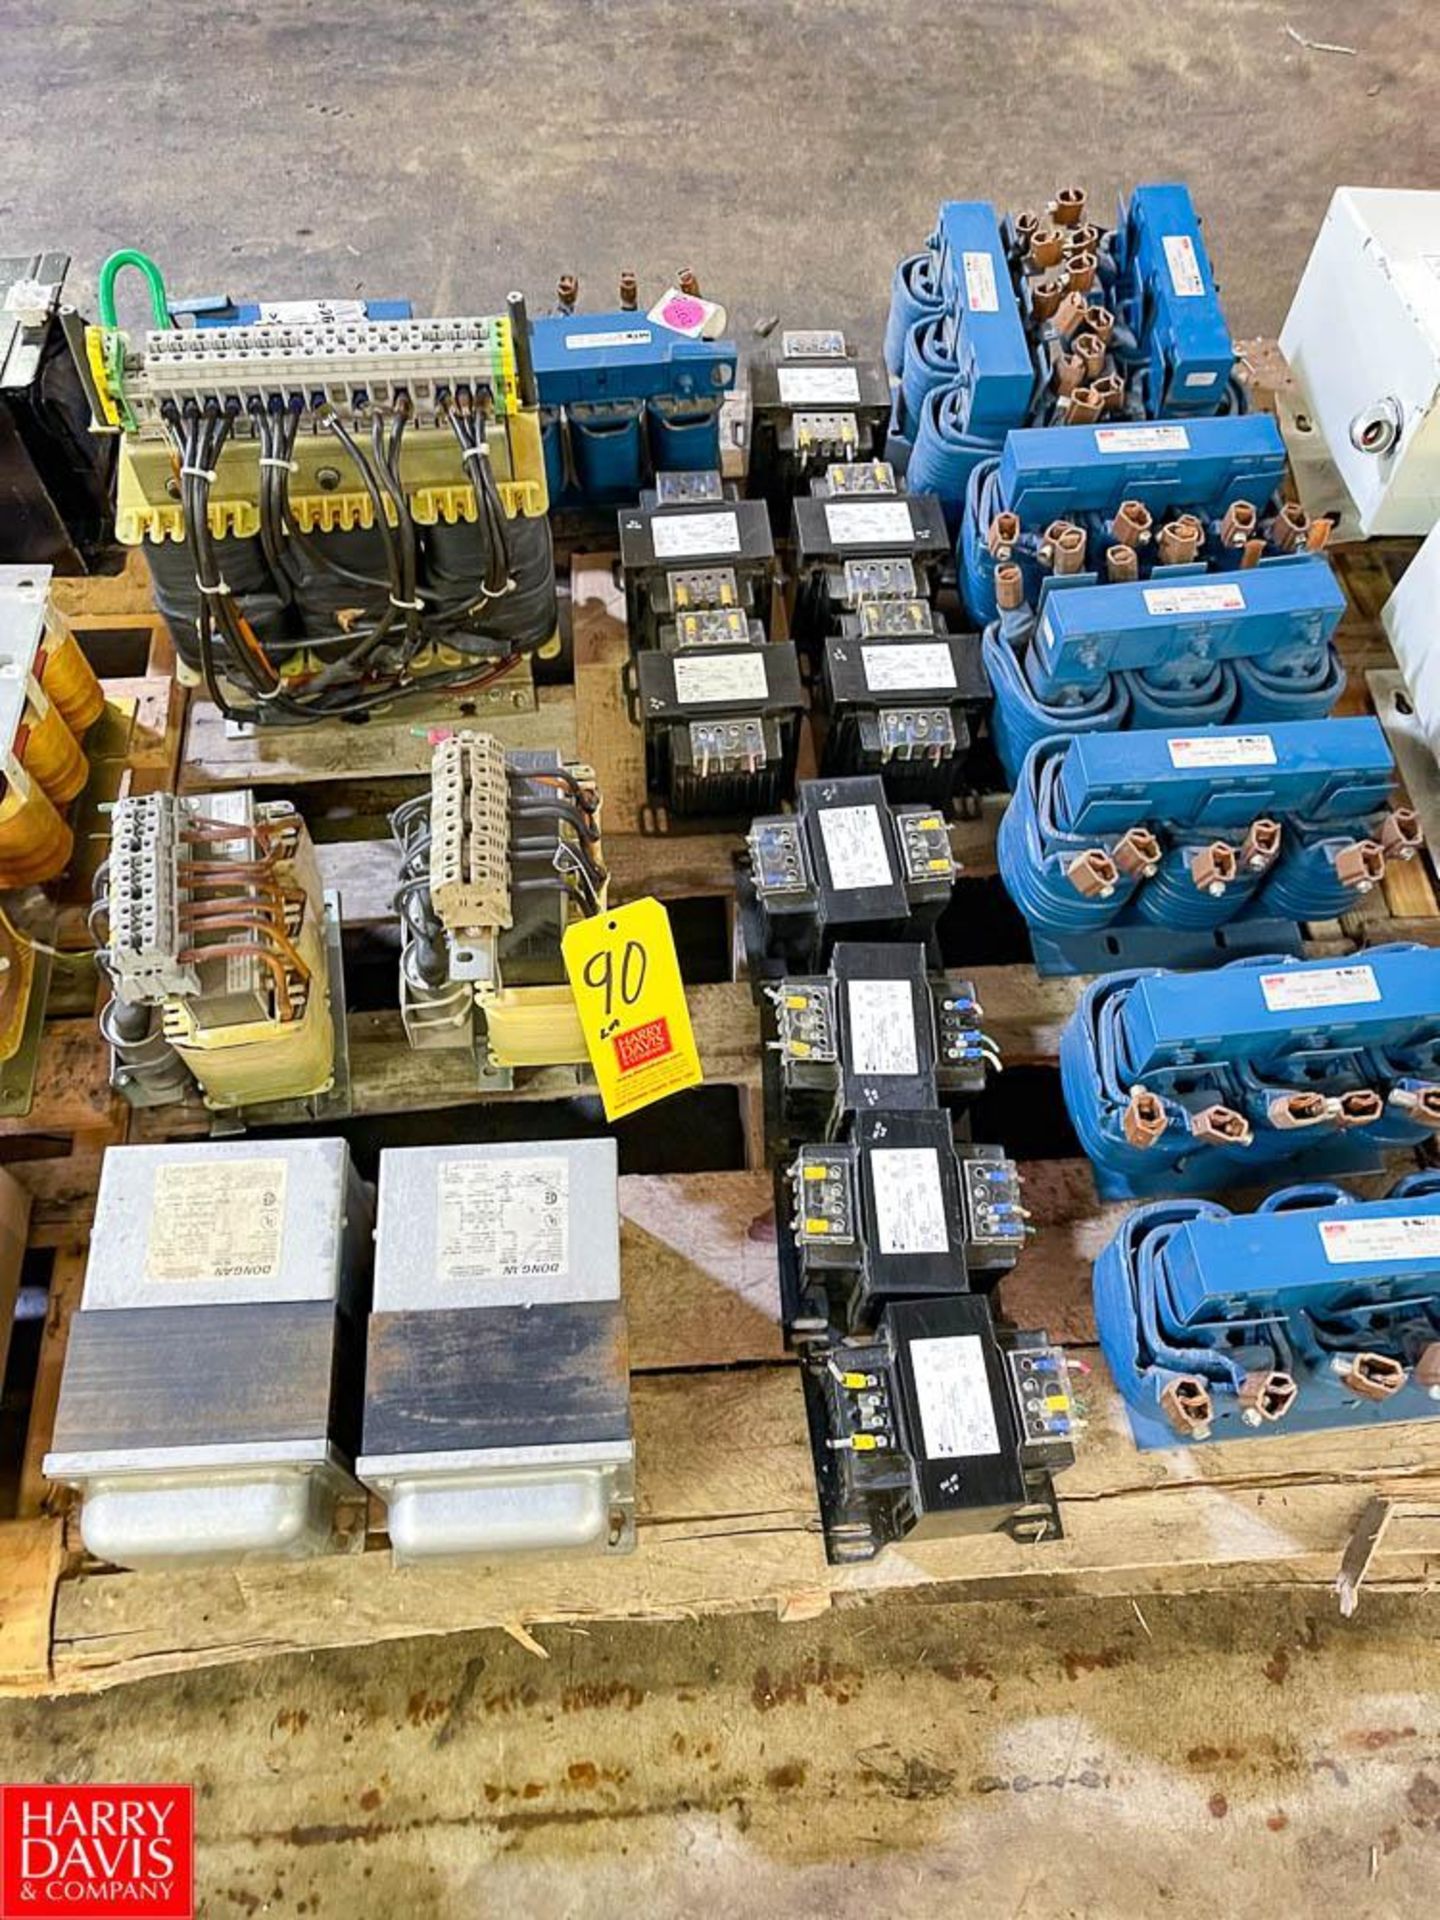 Assorted Dongan, MTS and Other Transformer